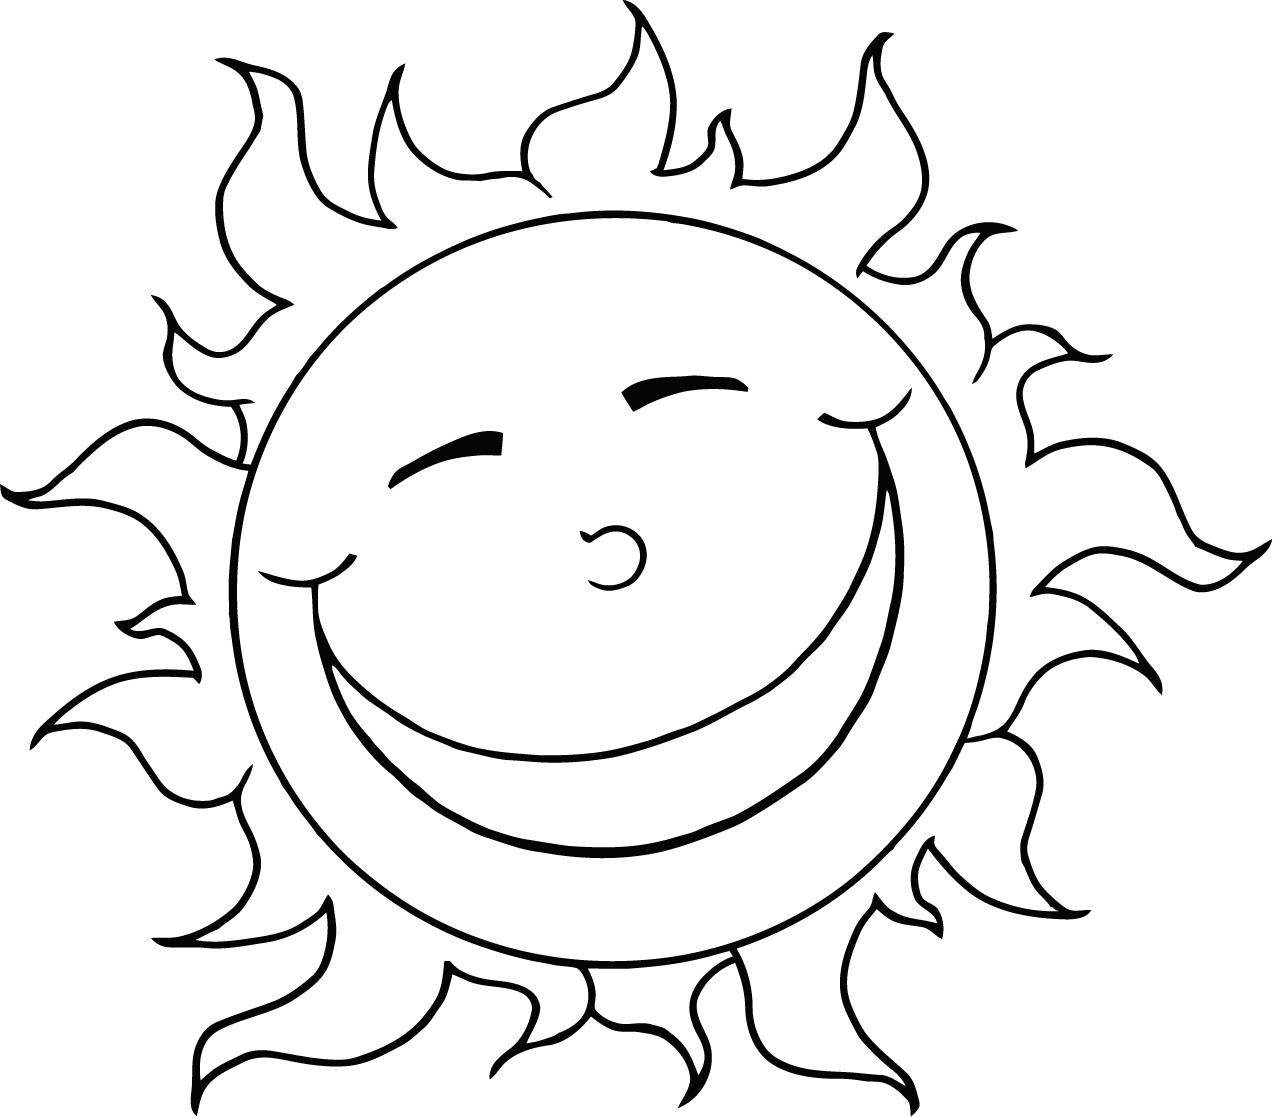 sun picture for kids coloring - Coloring Point - Coloring Point ...